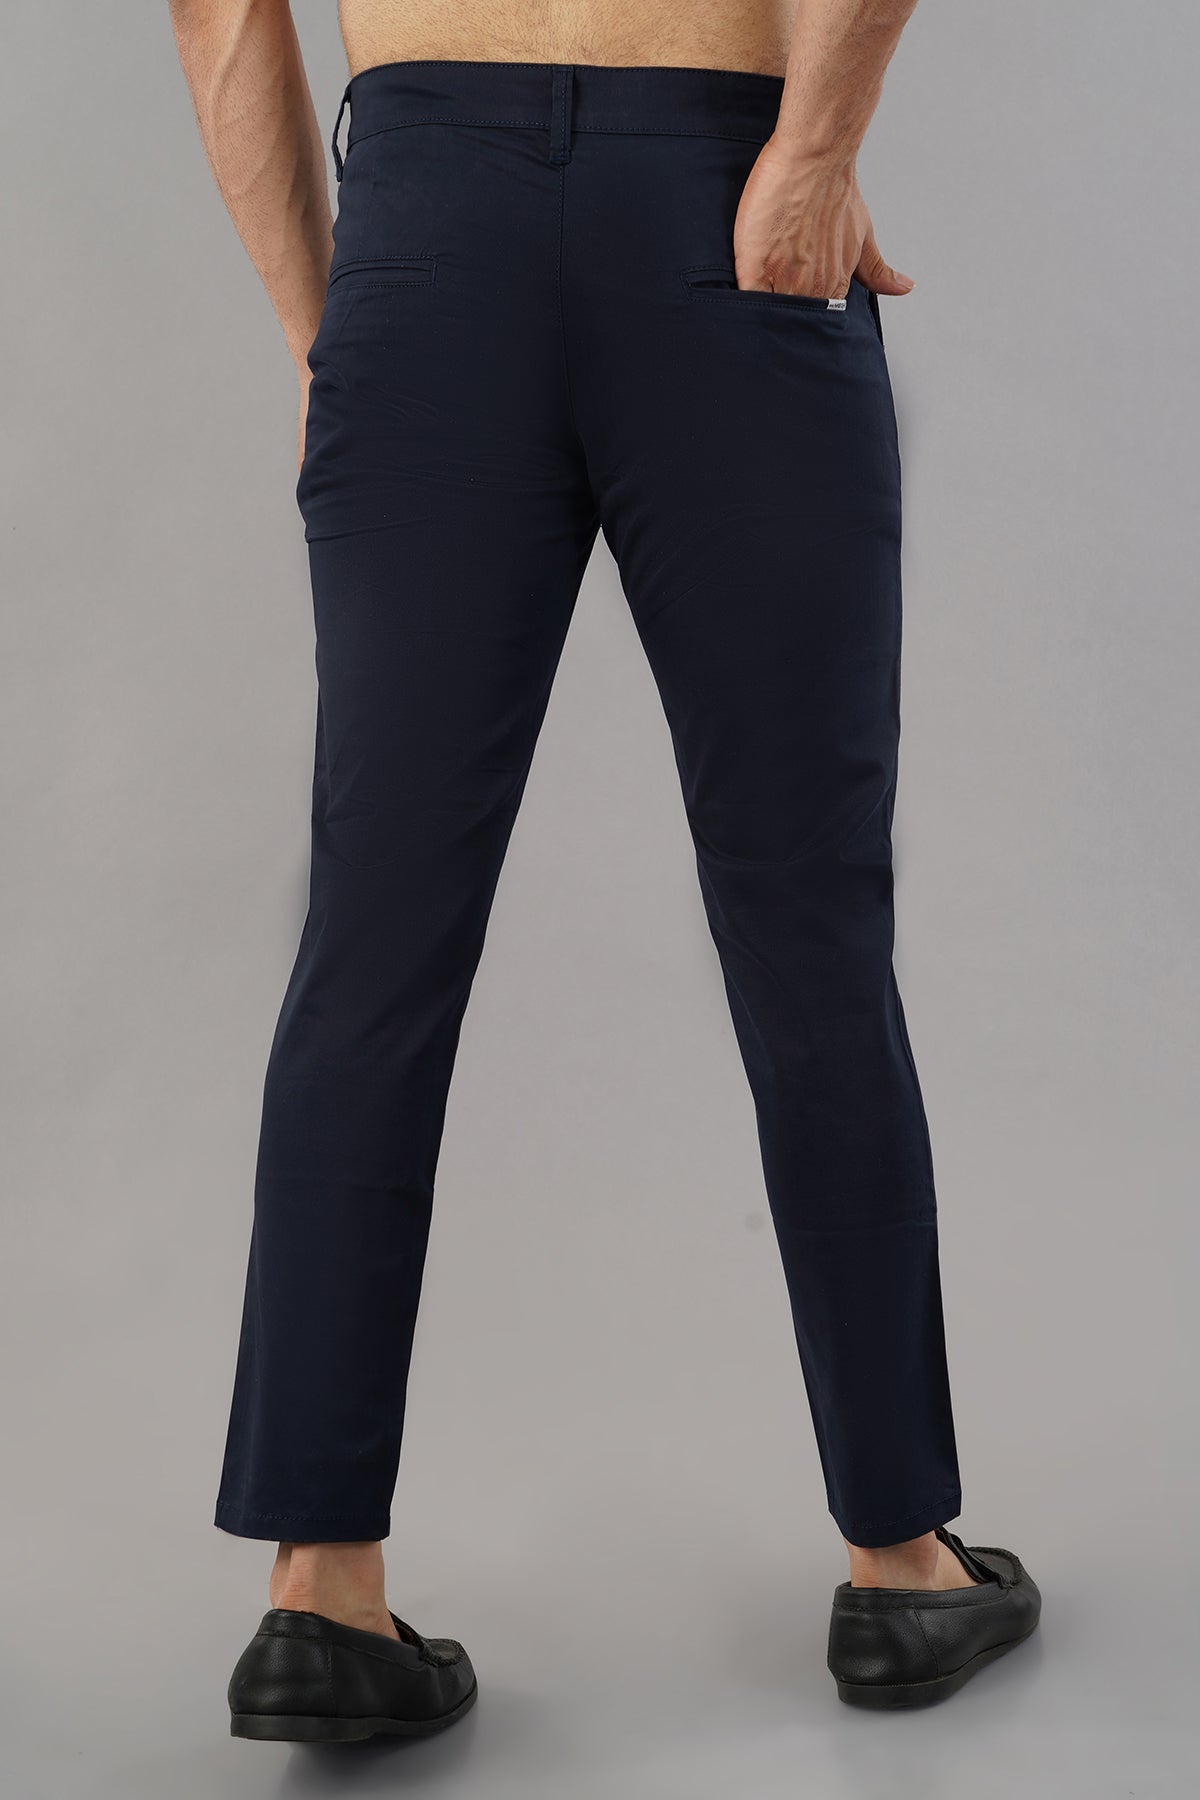 MEGHZ MENS SAPPHIRE BLUE CROPPED CHINOS